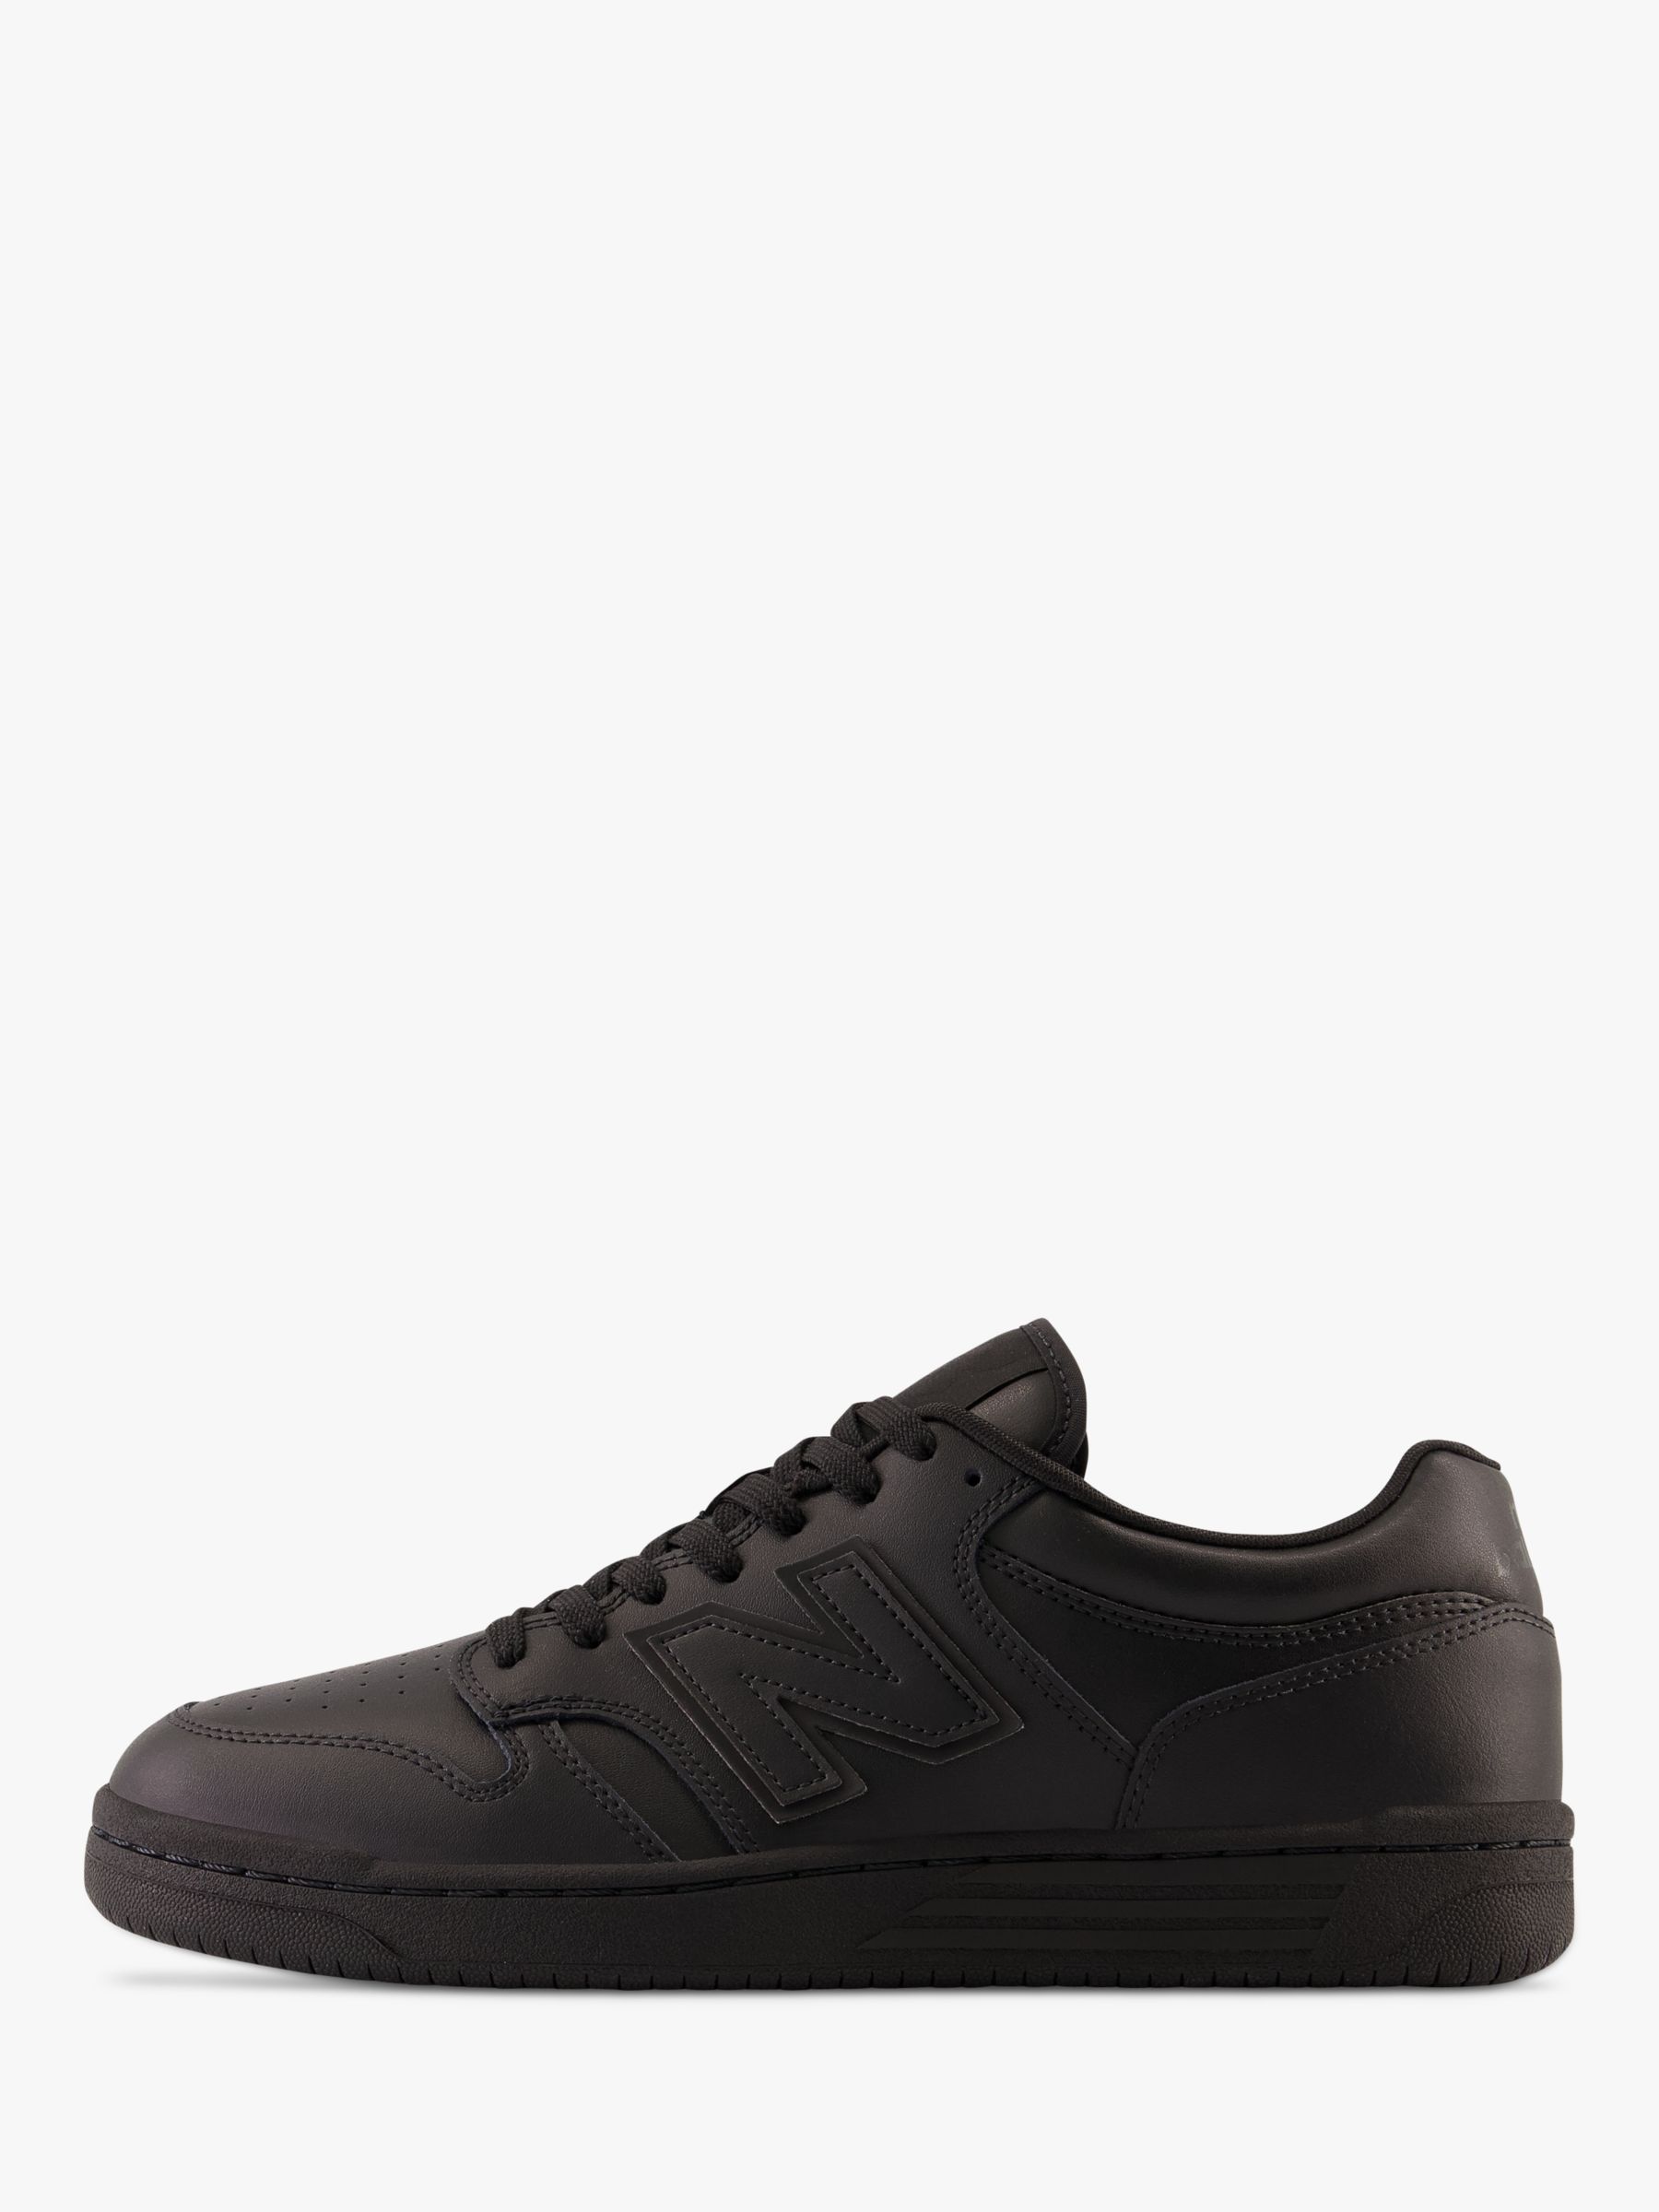 Buy New Balance 480 Leather Lace Up Trainers Online at johnlewis.com